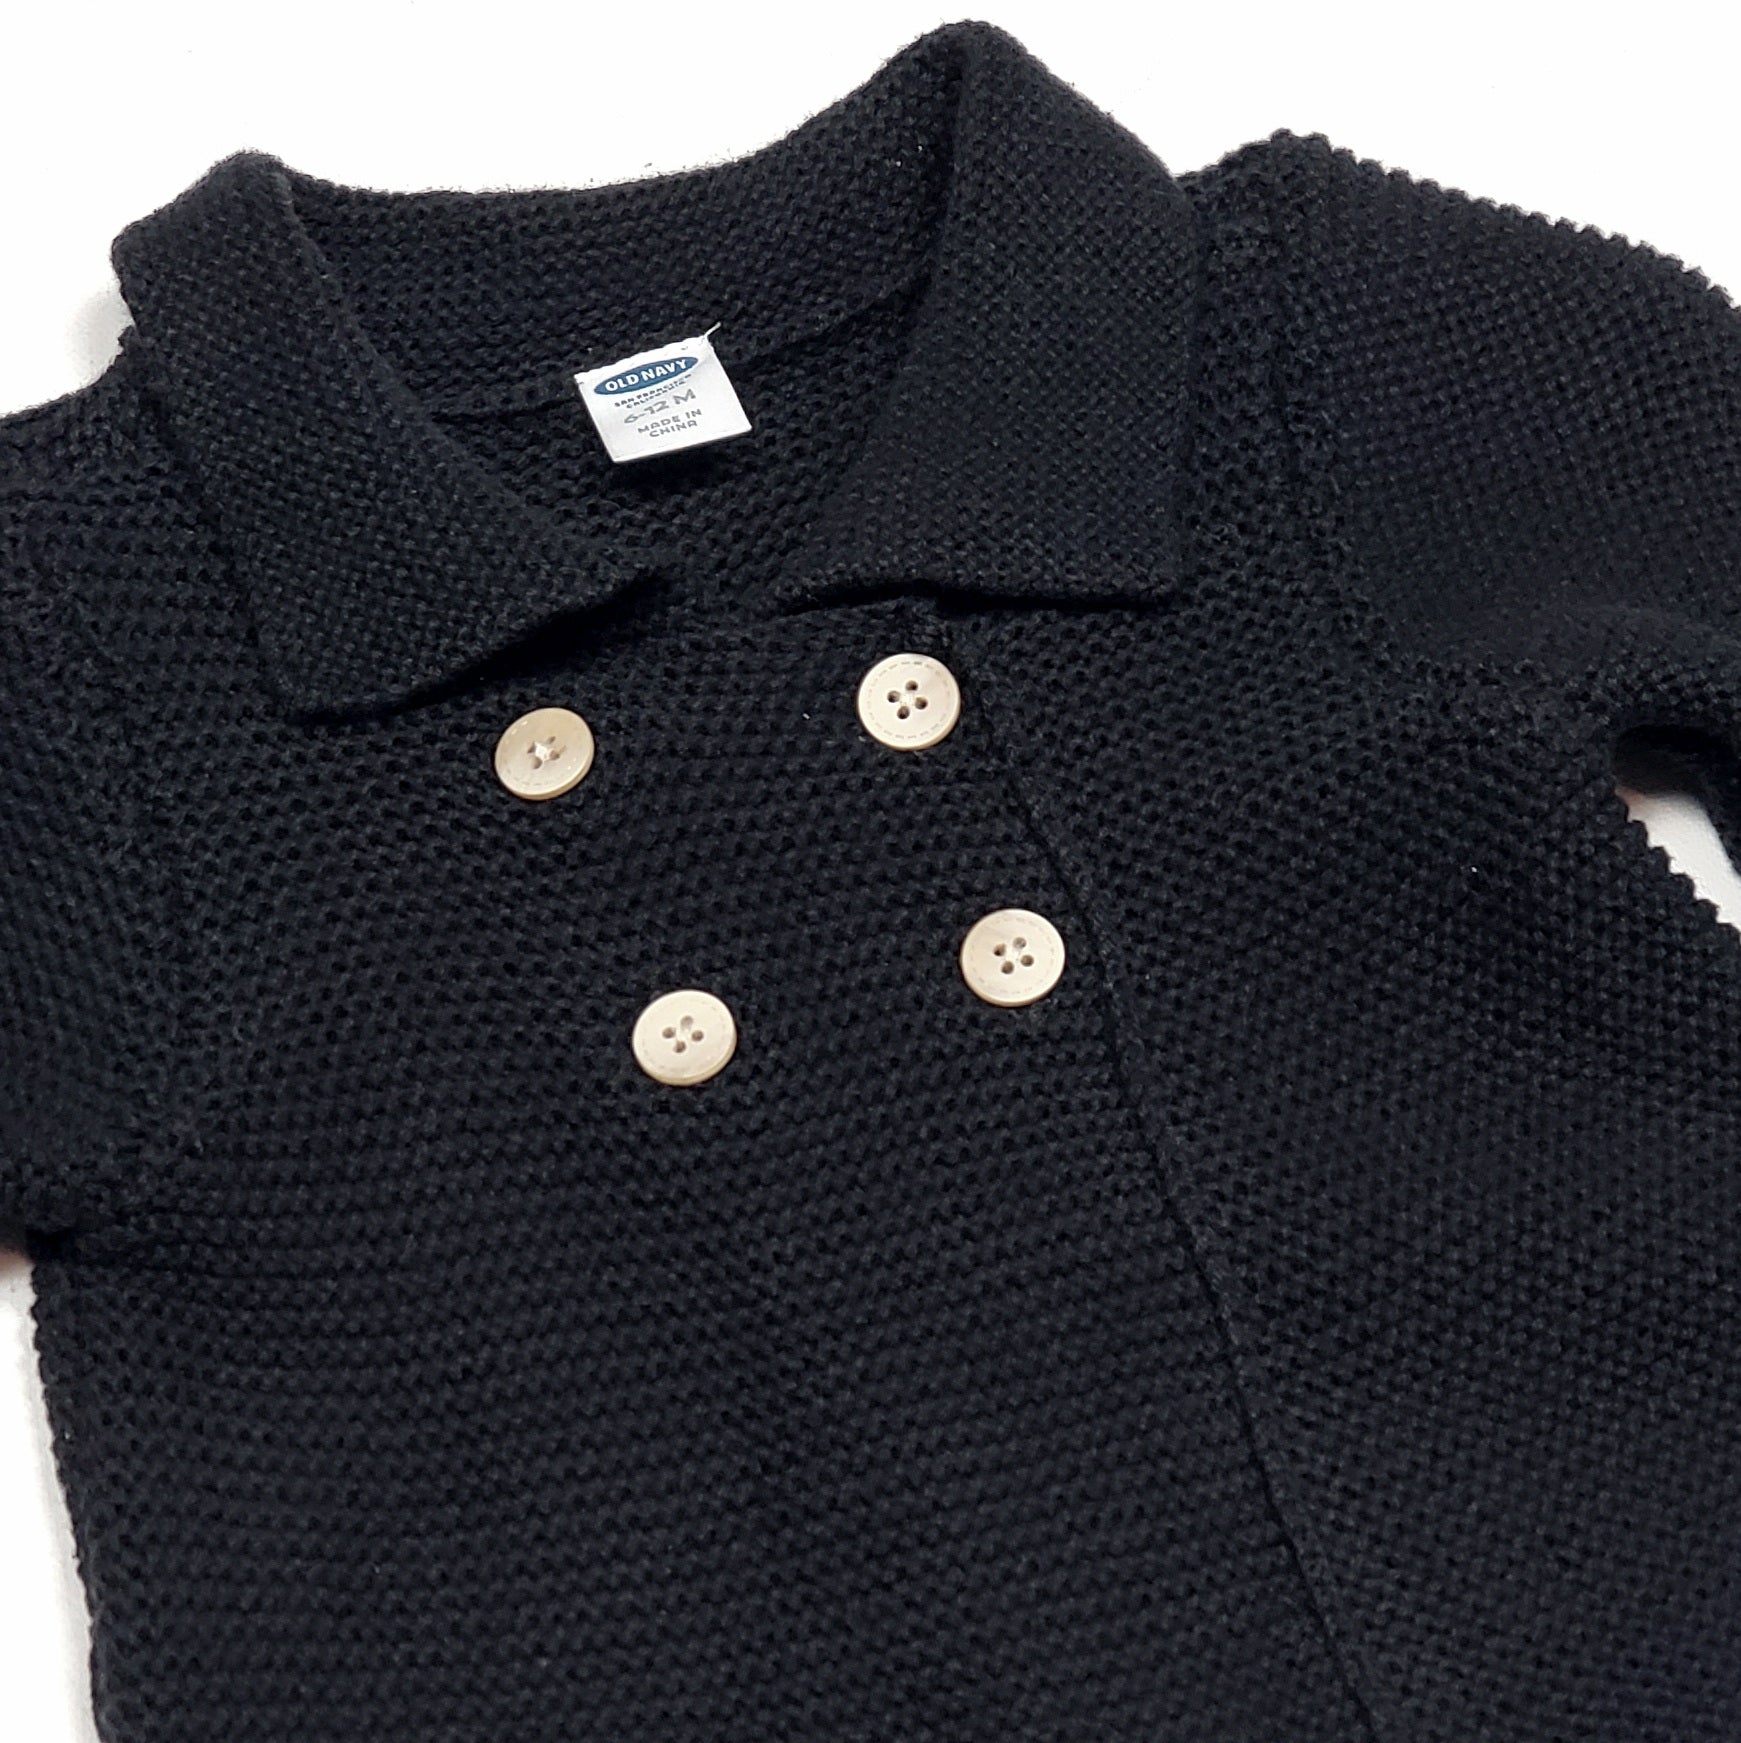 Old Navy Girls Black Cardigan Sweater 6 Months Used View 2